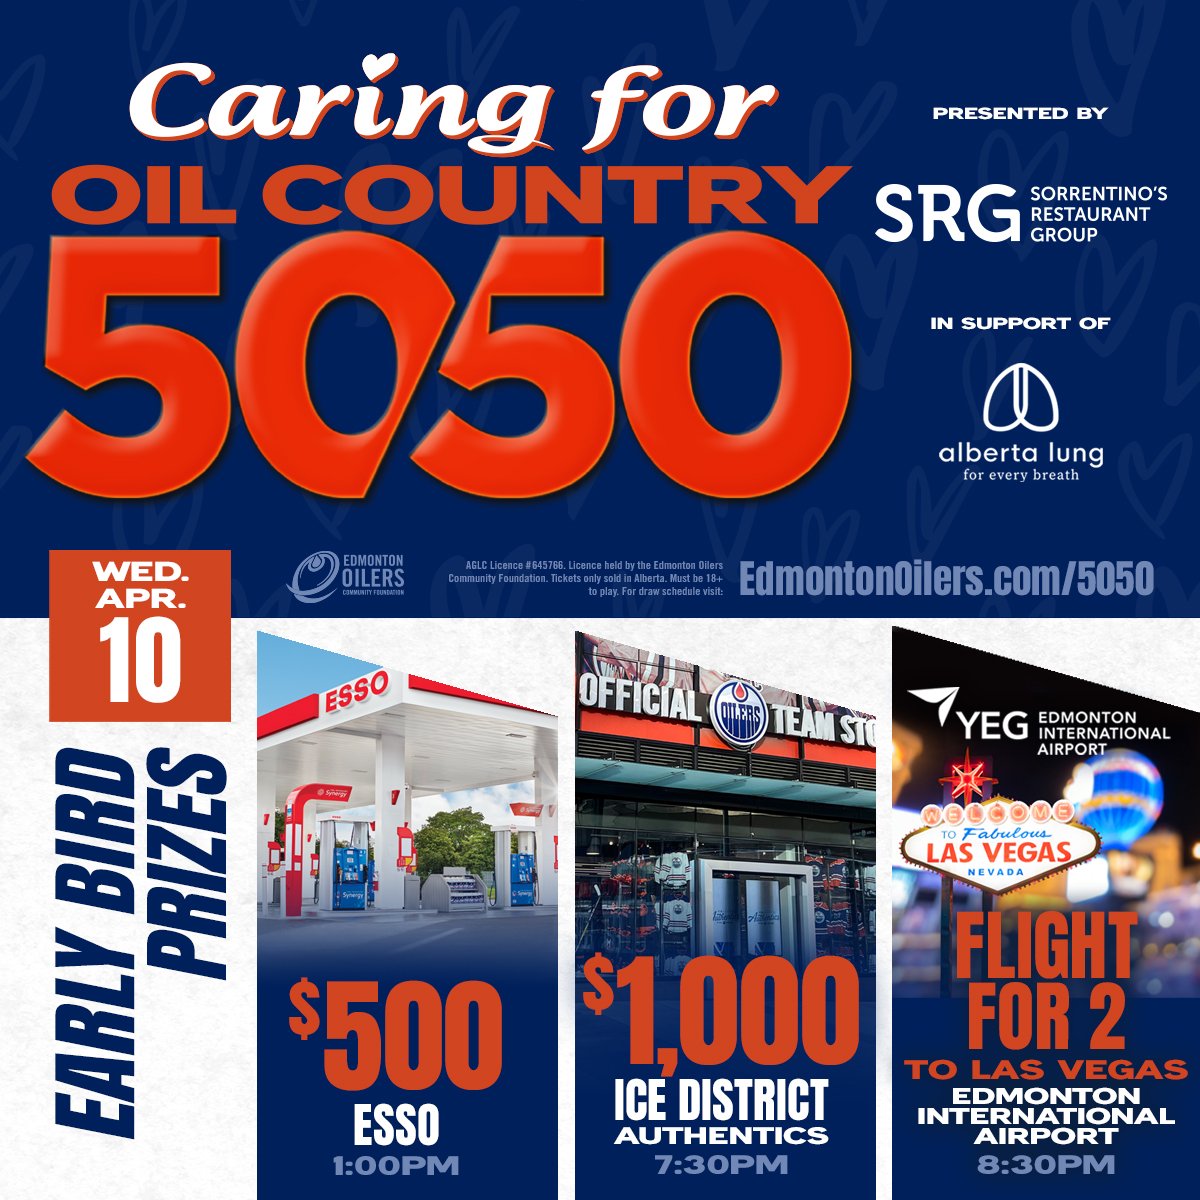 The Caring for Oil Country 50/50 continues today, presented by Sorrentino's Restaurant Group in support of @AlbertaLung! You could win $500 for Esso, $1,000 for @IceDistrictAuth or a flight for two to Las Vegas from @FlyYEG as early-bird prizes! 🎟 EdmontonOilers.com/5050tw